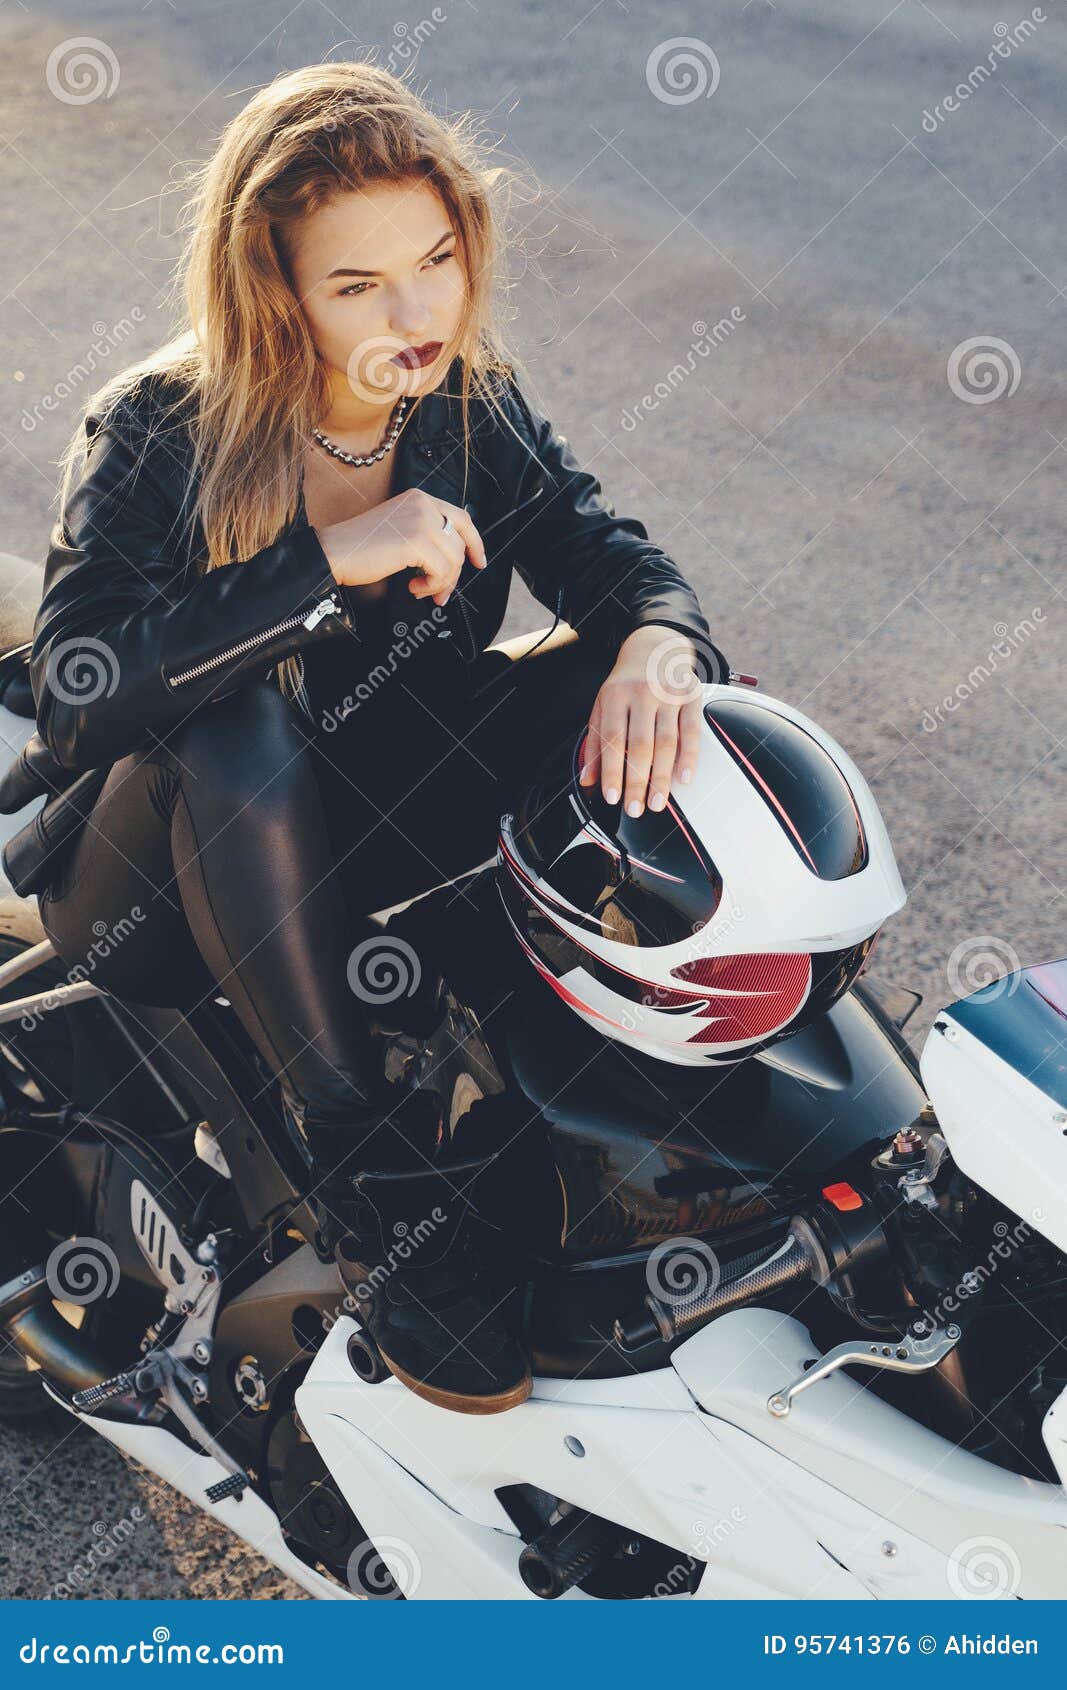 Biker Girl in a Leather Clothes on a Motorcycle Stock Photo - Image of ...